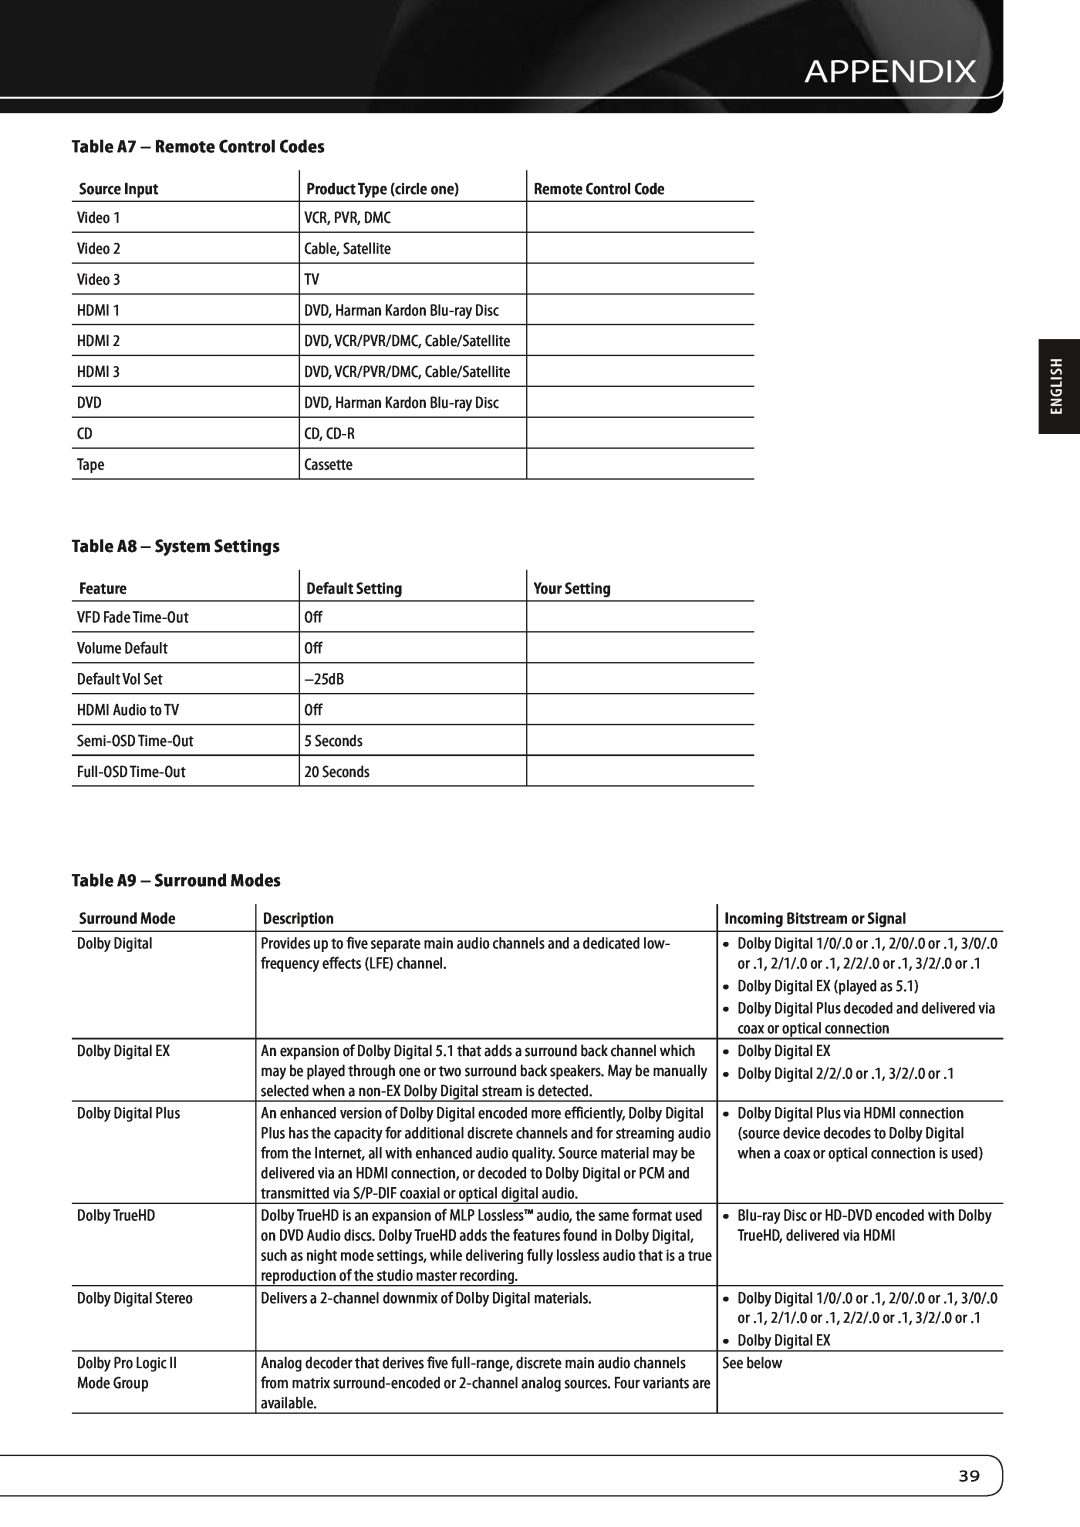 Harman-Kardon AVR 160 owner manual Appendix, English, Table A7 - Remote Control Codes, Table A8 - System Settings 